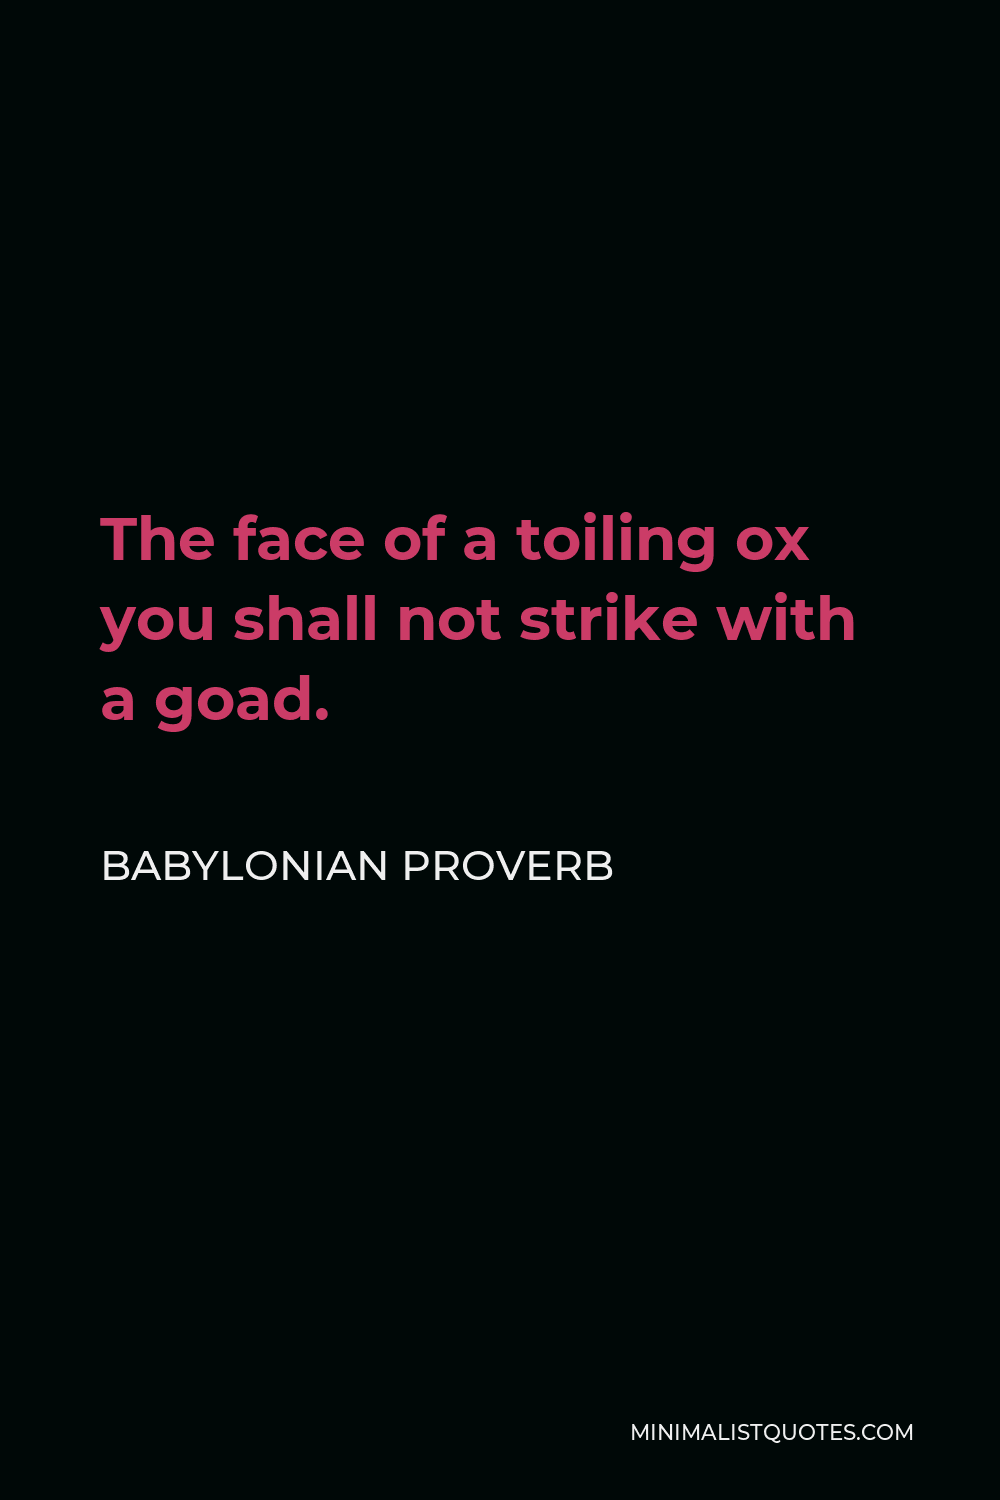 Babylonian Proverb Quote - The face of a toiling ox you shall not strike with a goad.